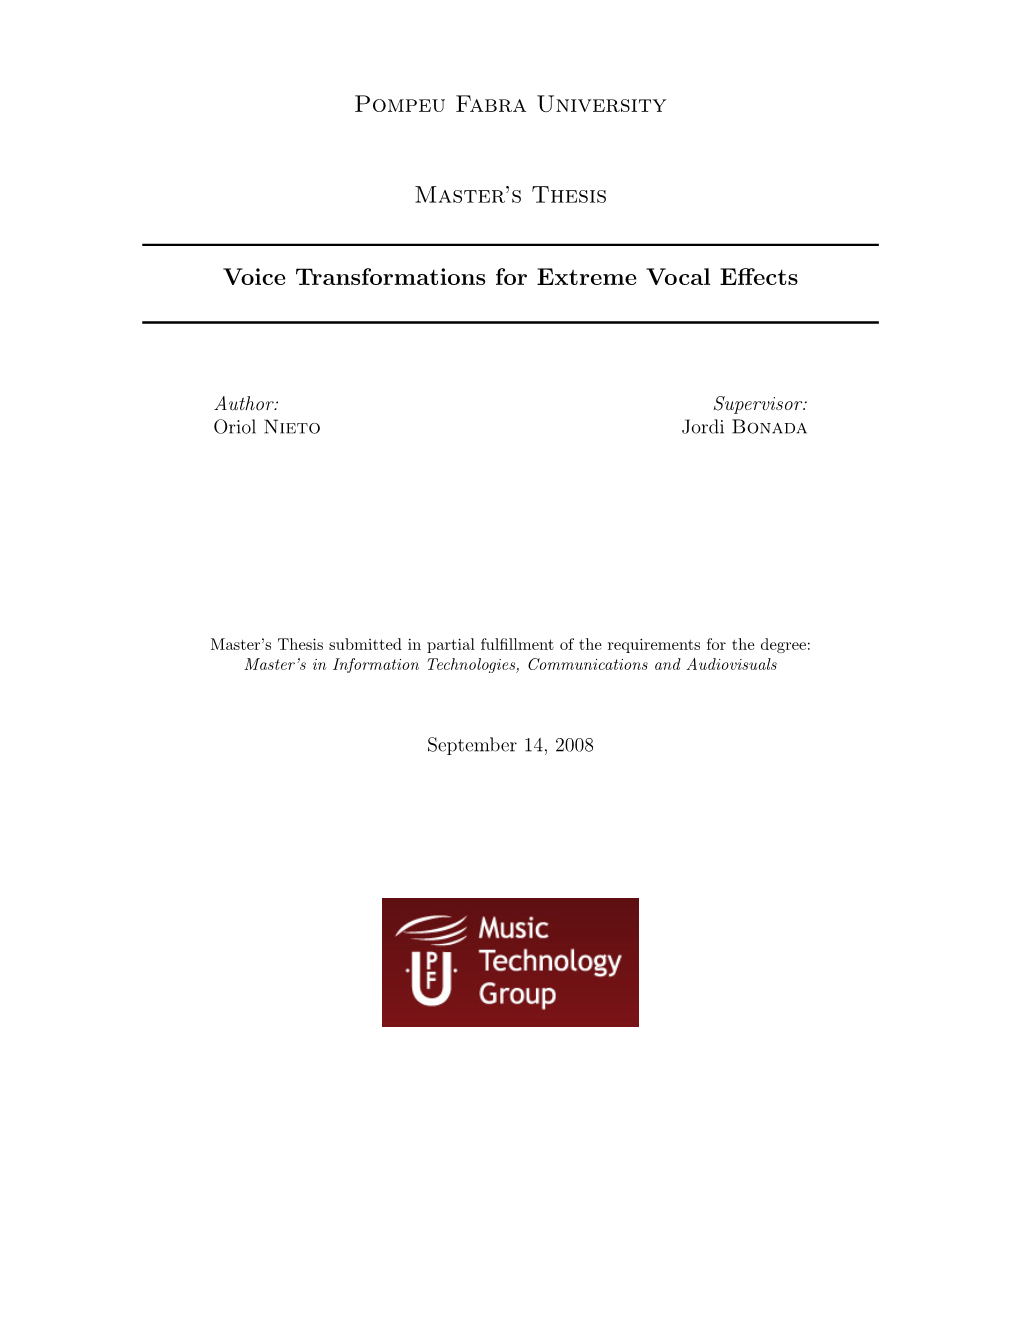 Pompeu Fabra University Master's Thesis Voice Transformations For